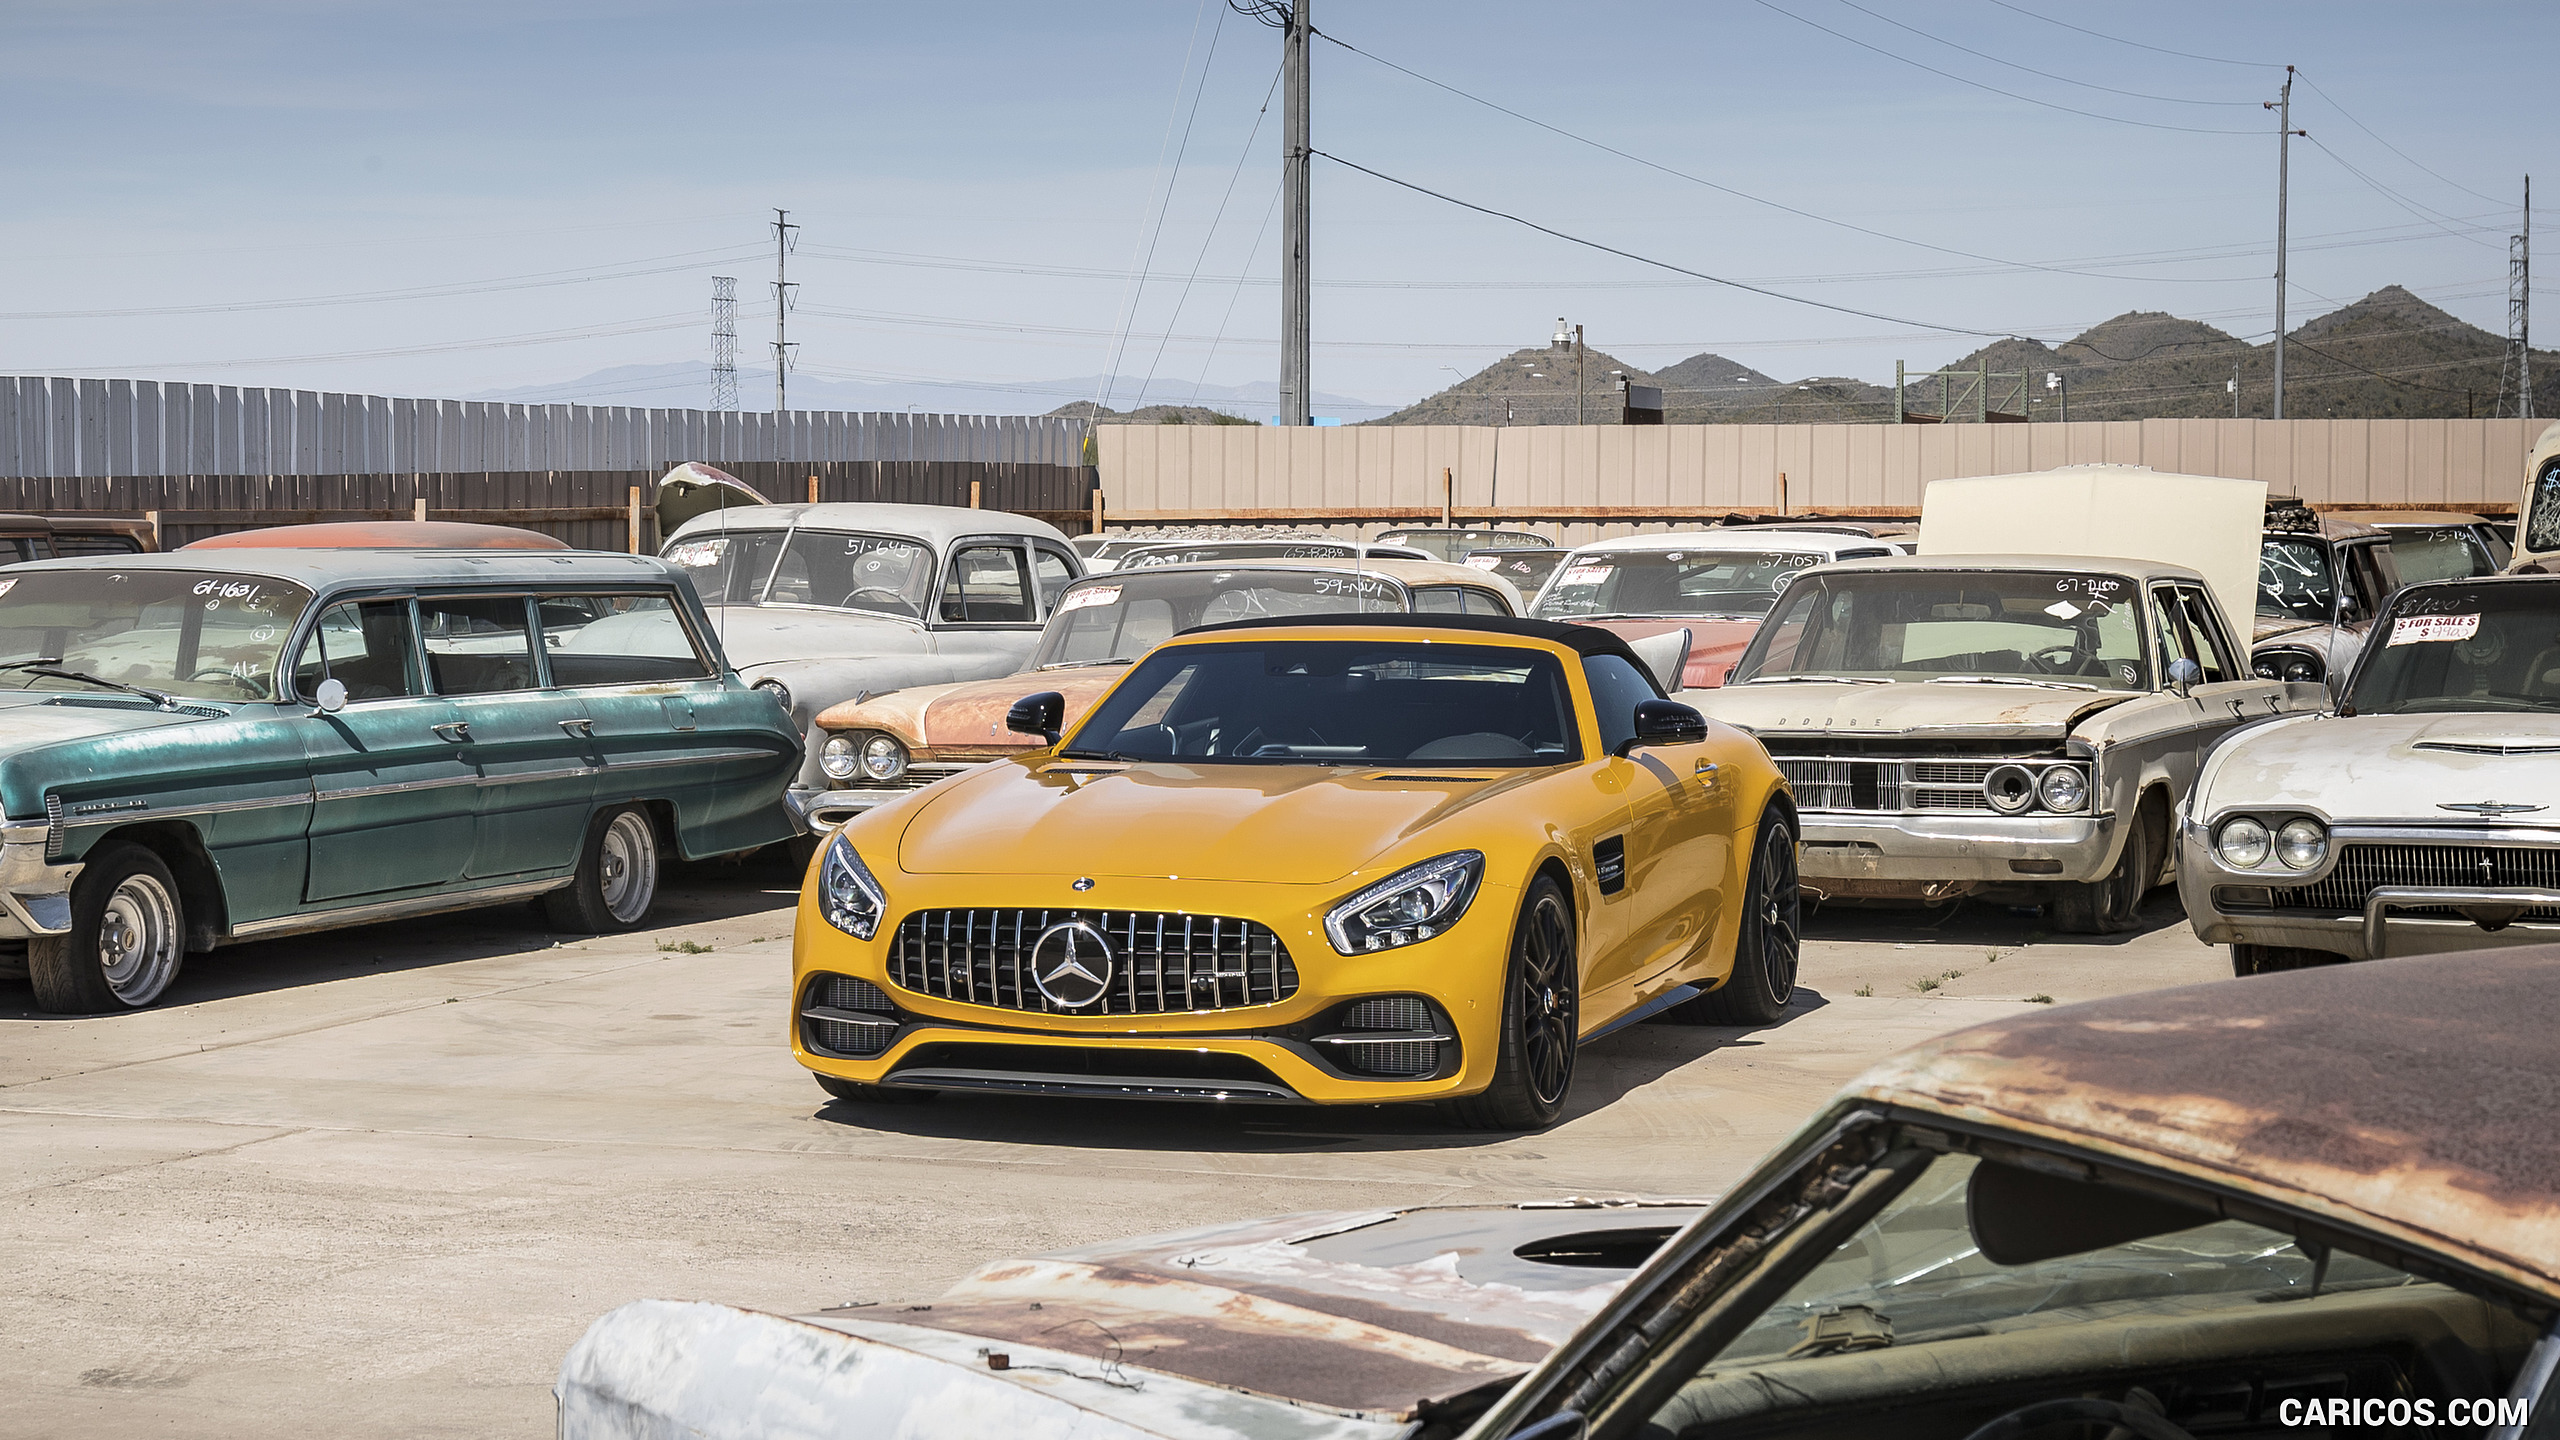 2018 Mercedes-AMG GT C Roadster - Front Three-Quarter, #207 of 350